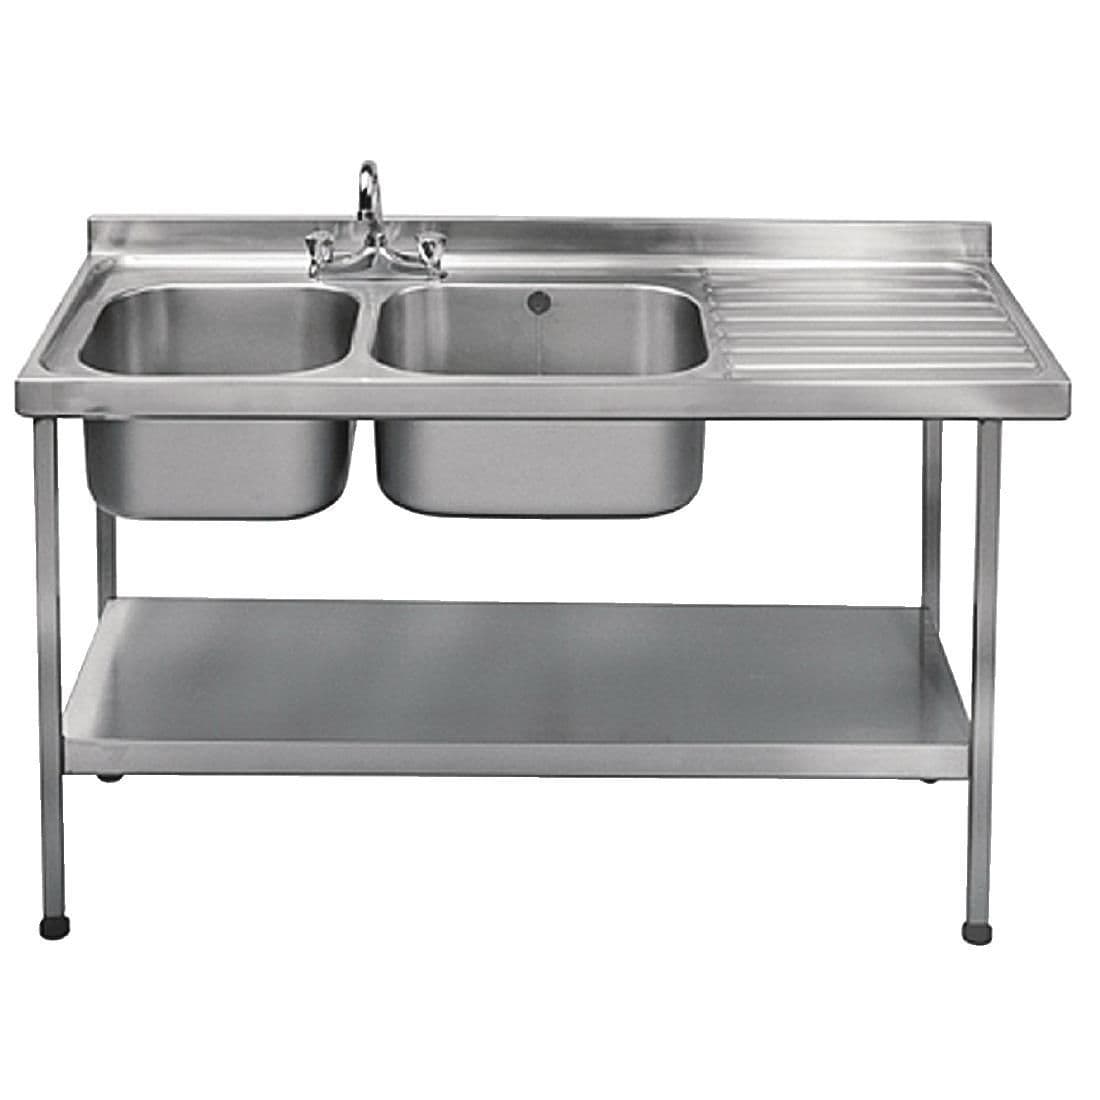 Franke Sissons Self Assembly Stainless Steel Double Sink Right Hand Drainer 1500x600mm JD Catering Equipment Solutions Ltd